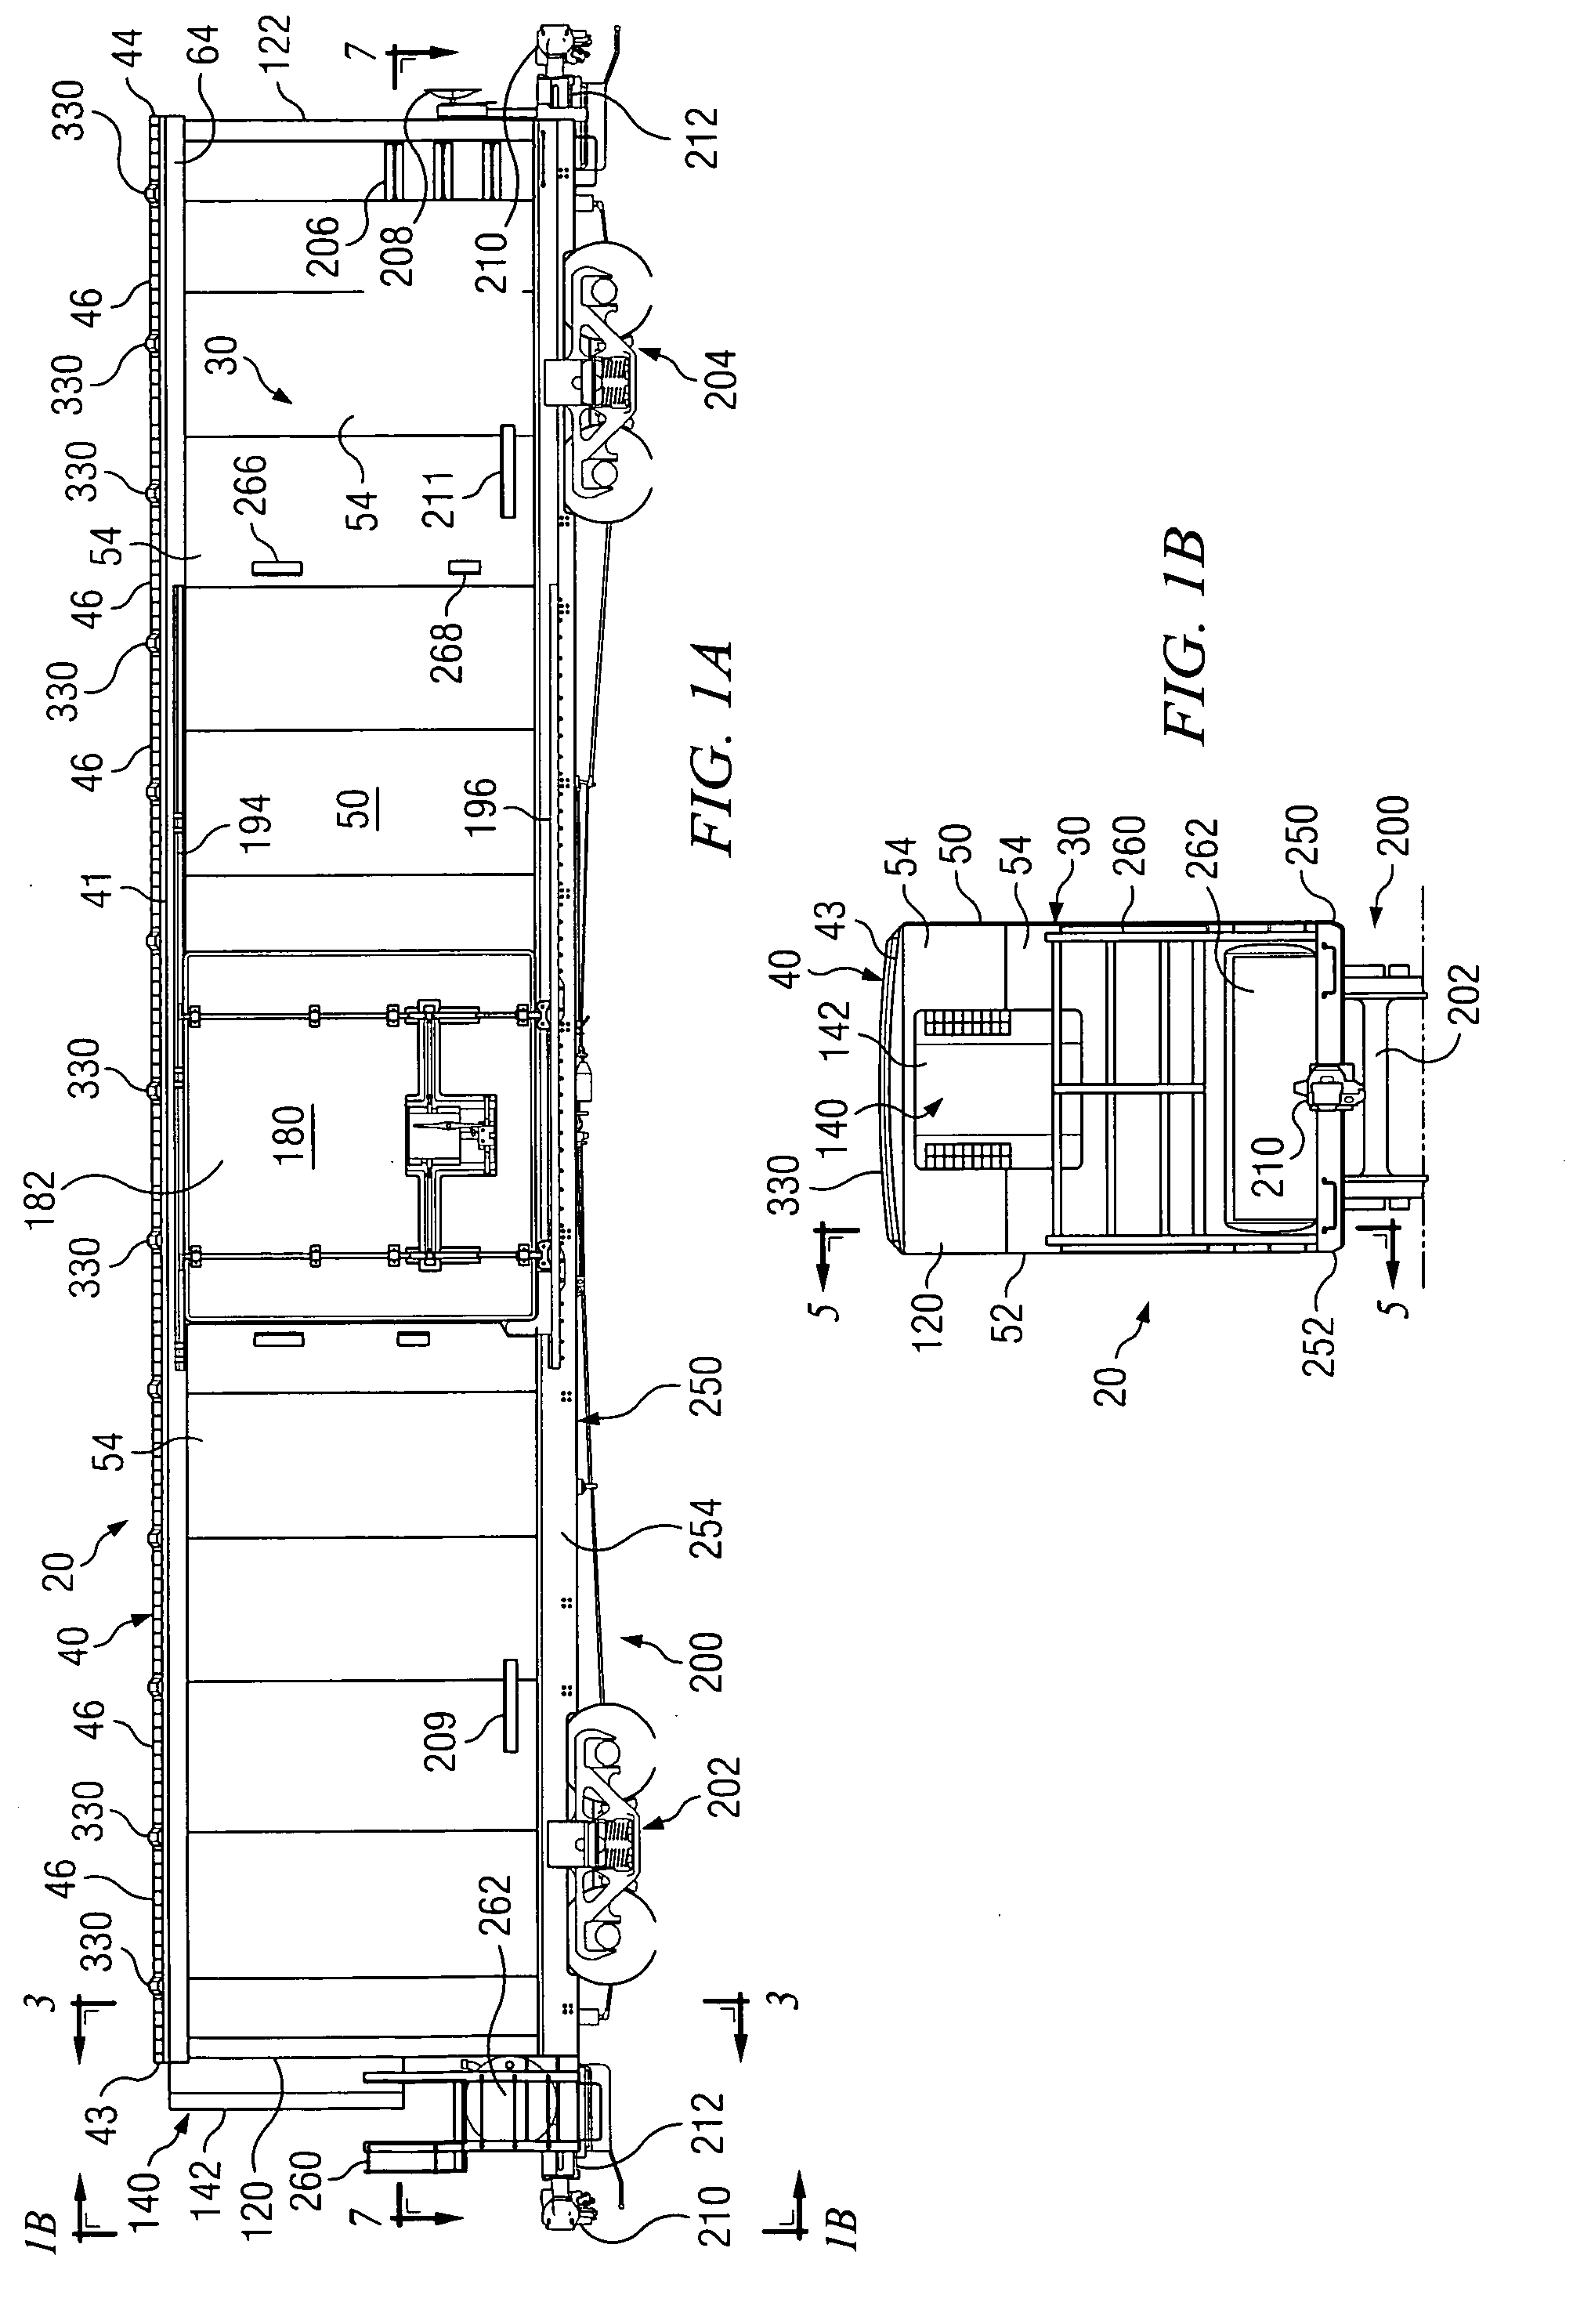 Method of assembling a temperature controlled railway car